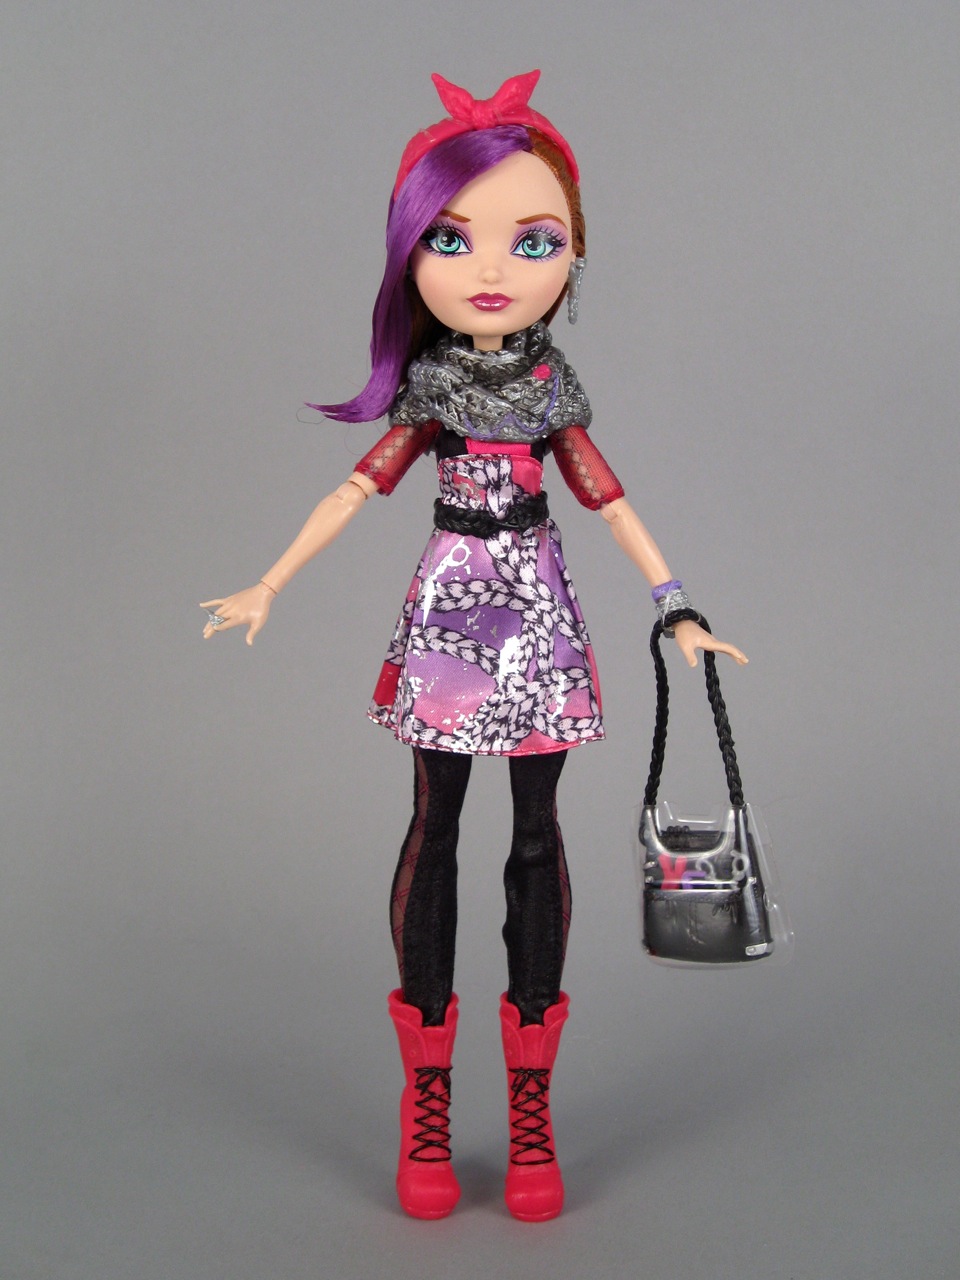 Holly O' Hair and Poppy O' Hair by Ever After High | The Toy Box Philosopher